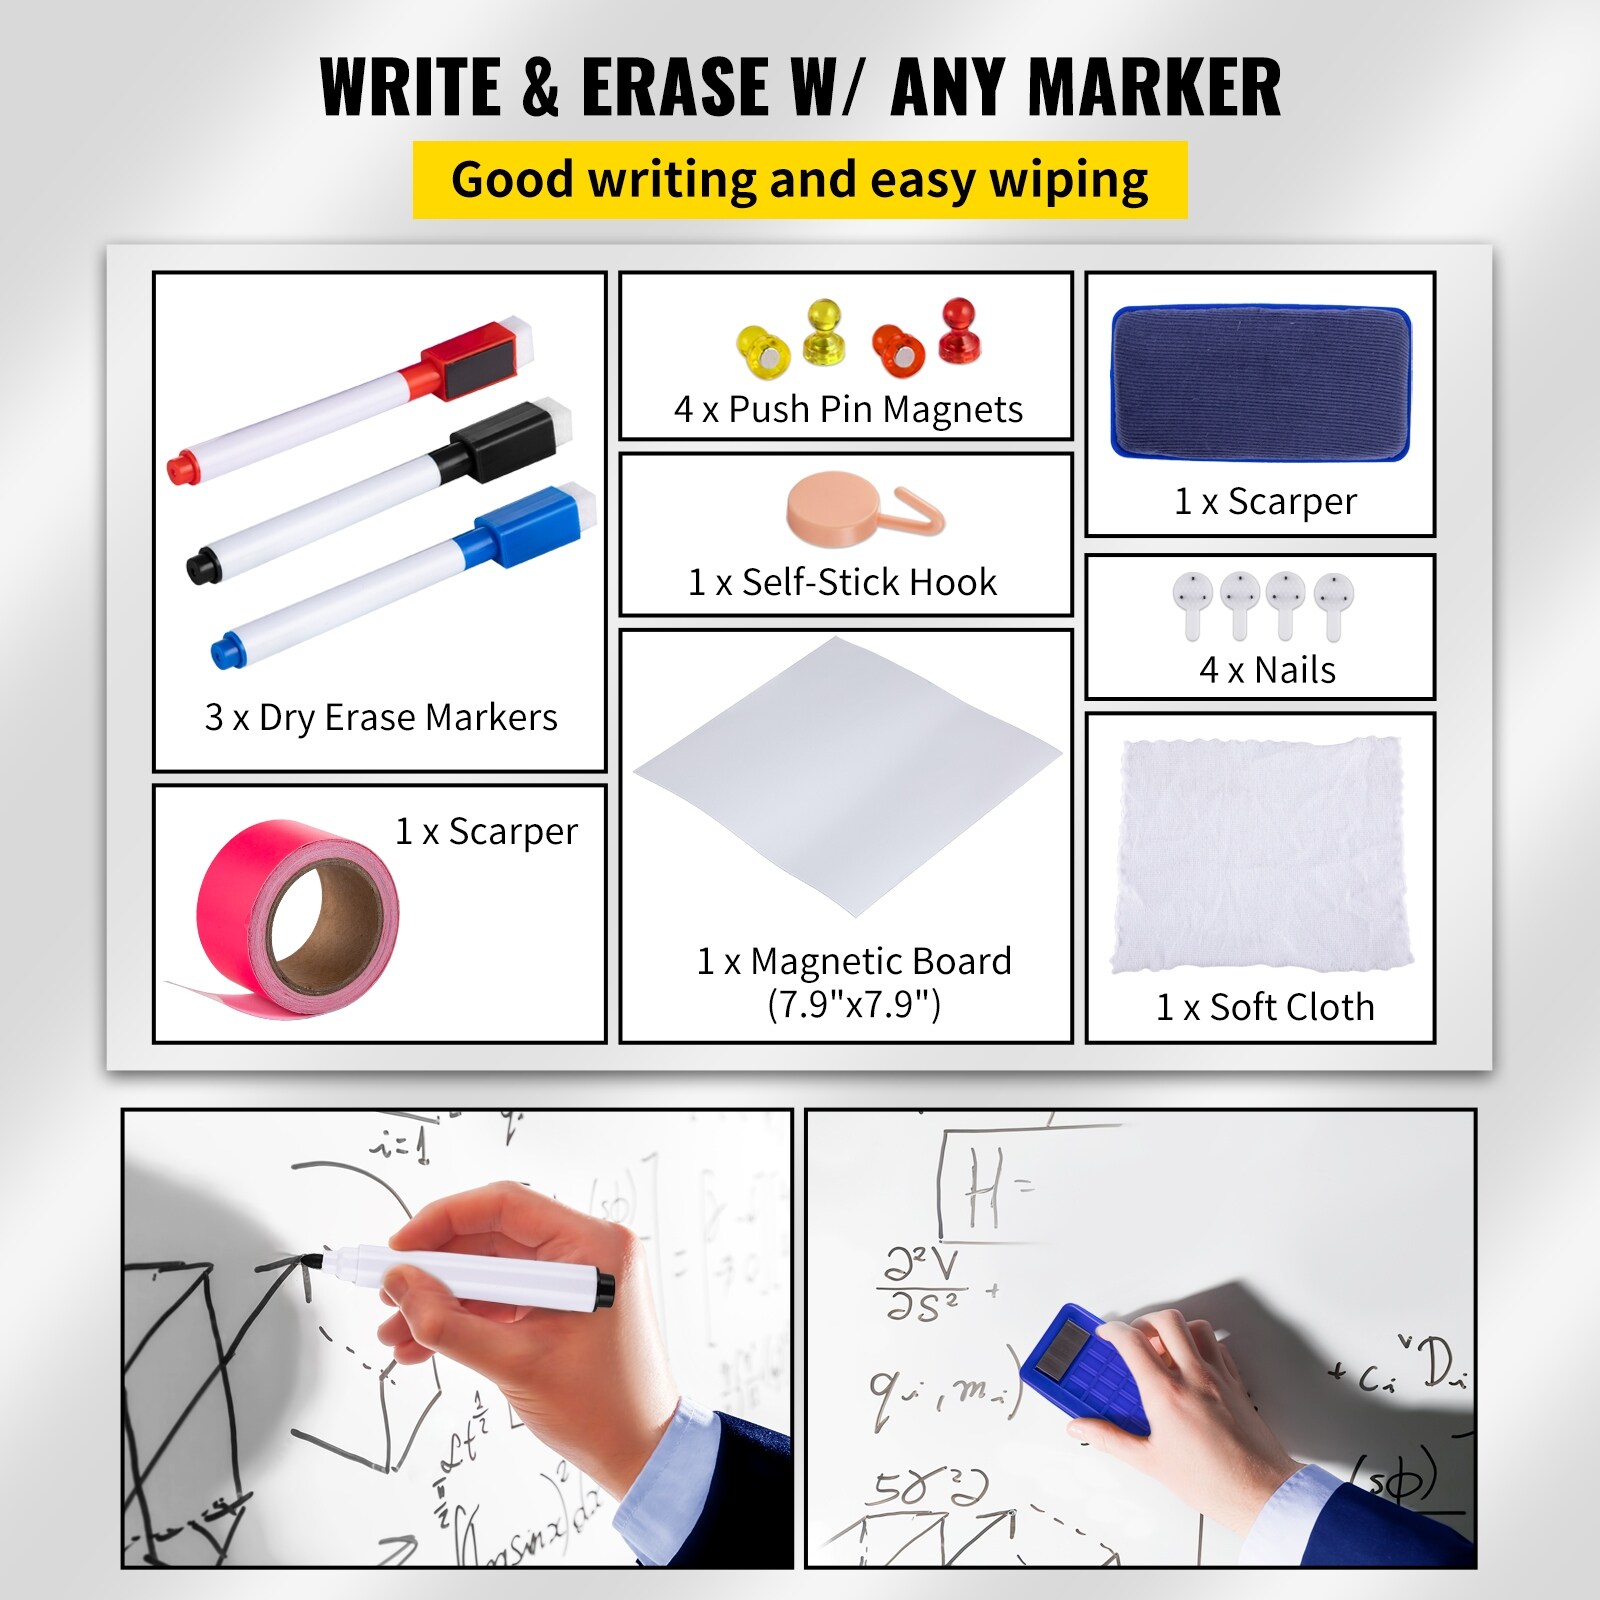 VEVOR White Board Paper 8x4 ft Dry Erase Whiteboard Paper w/ Adhesive Backing Removable Peel and Stick Pet Surface No Ghost for Kids Home and Office